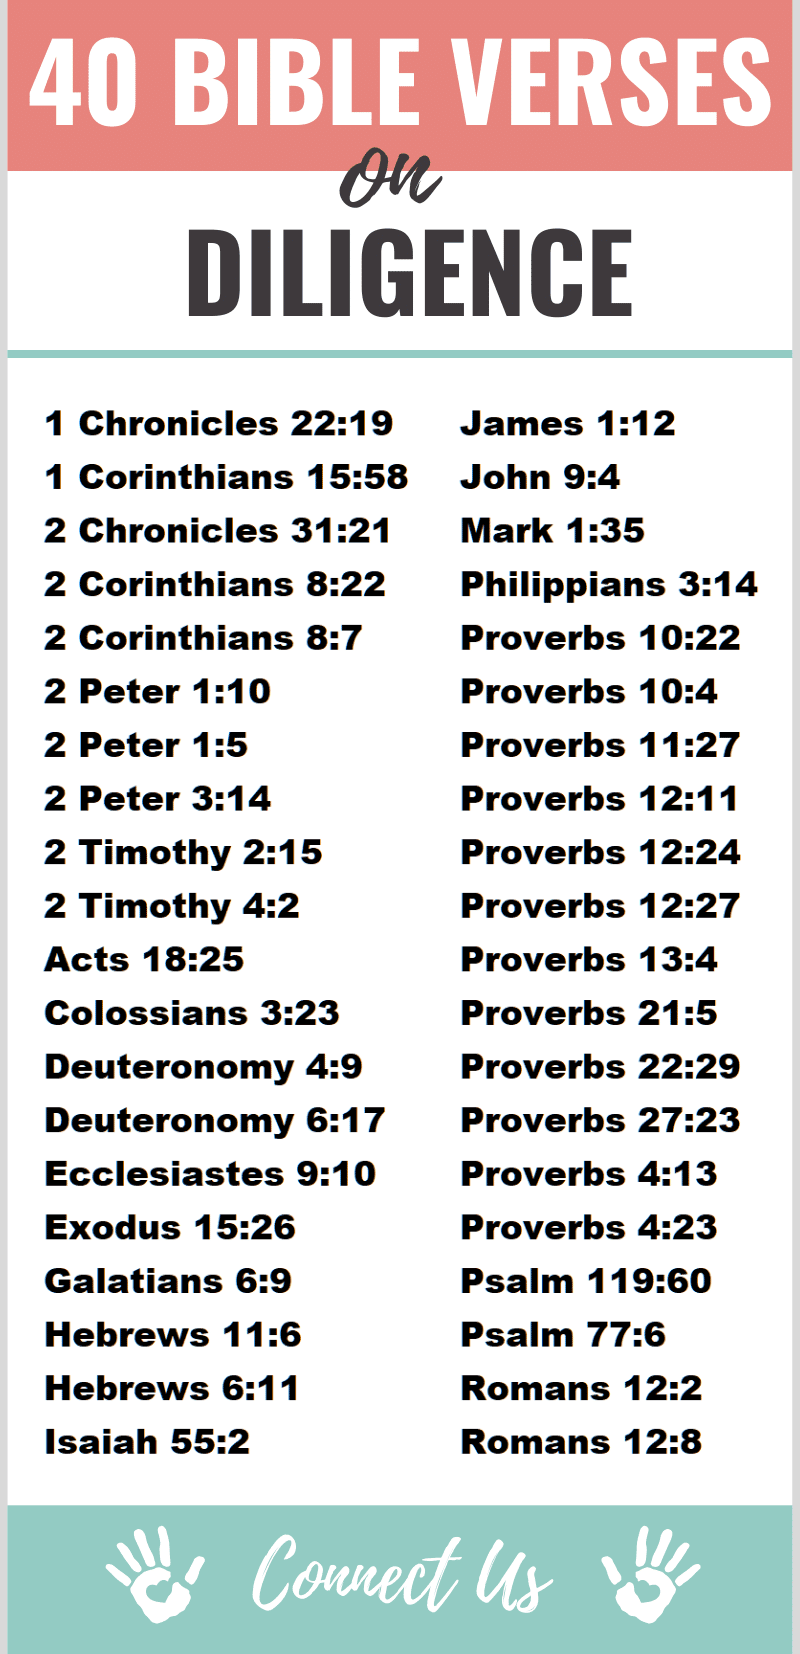 Bible Verses on Diligence